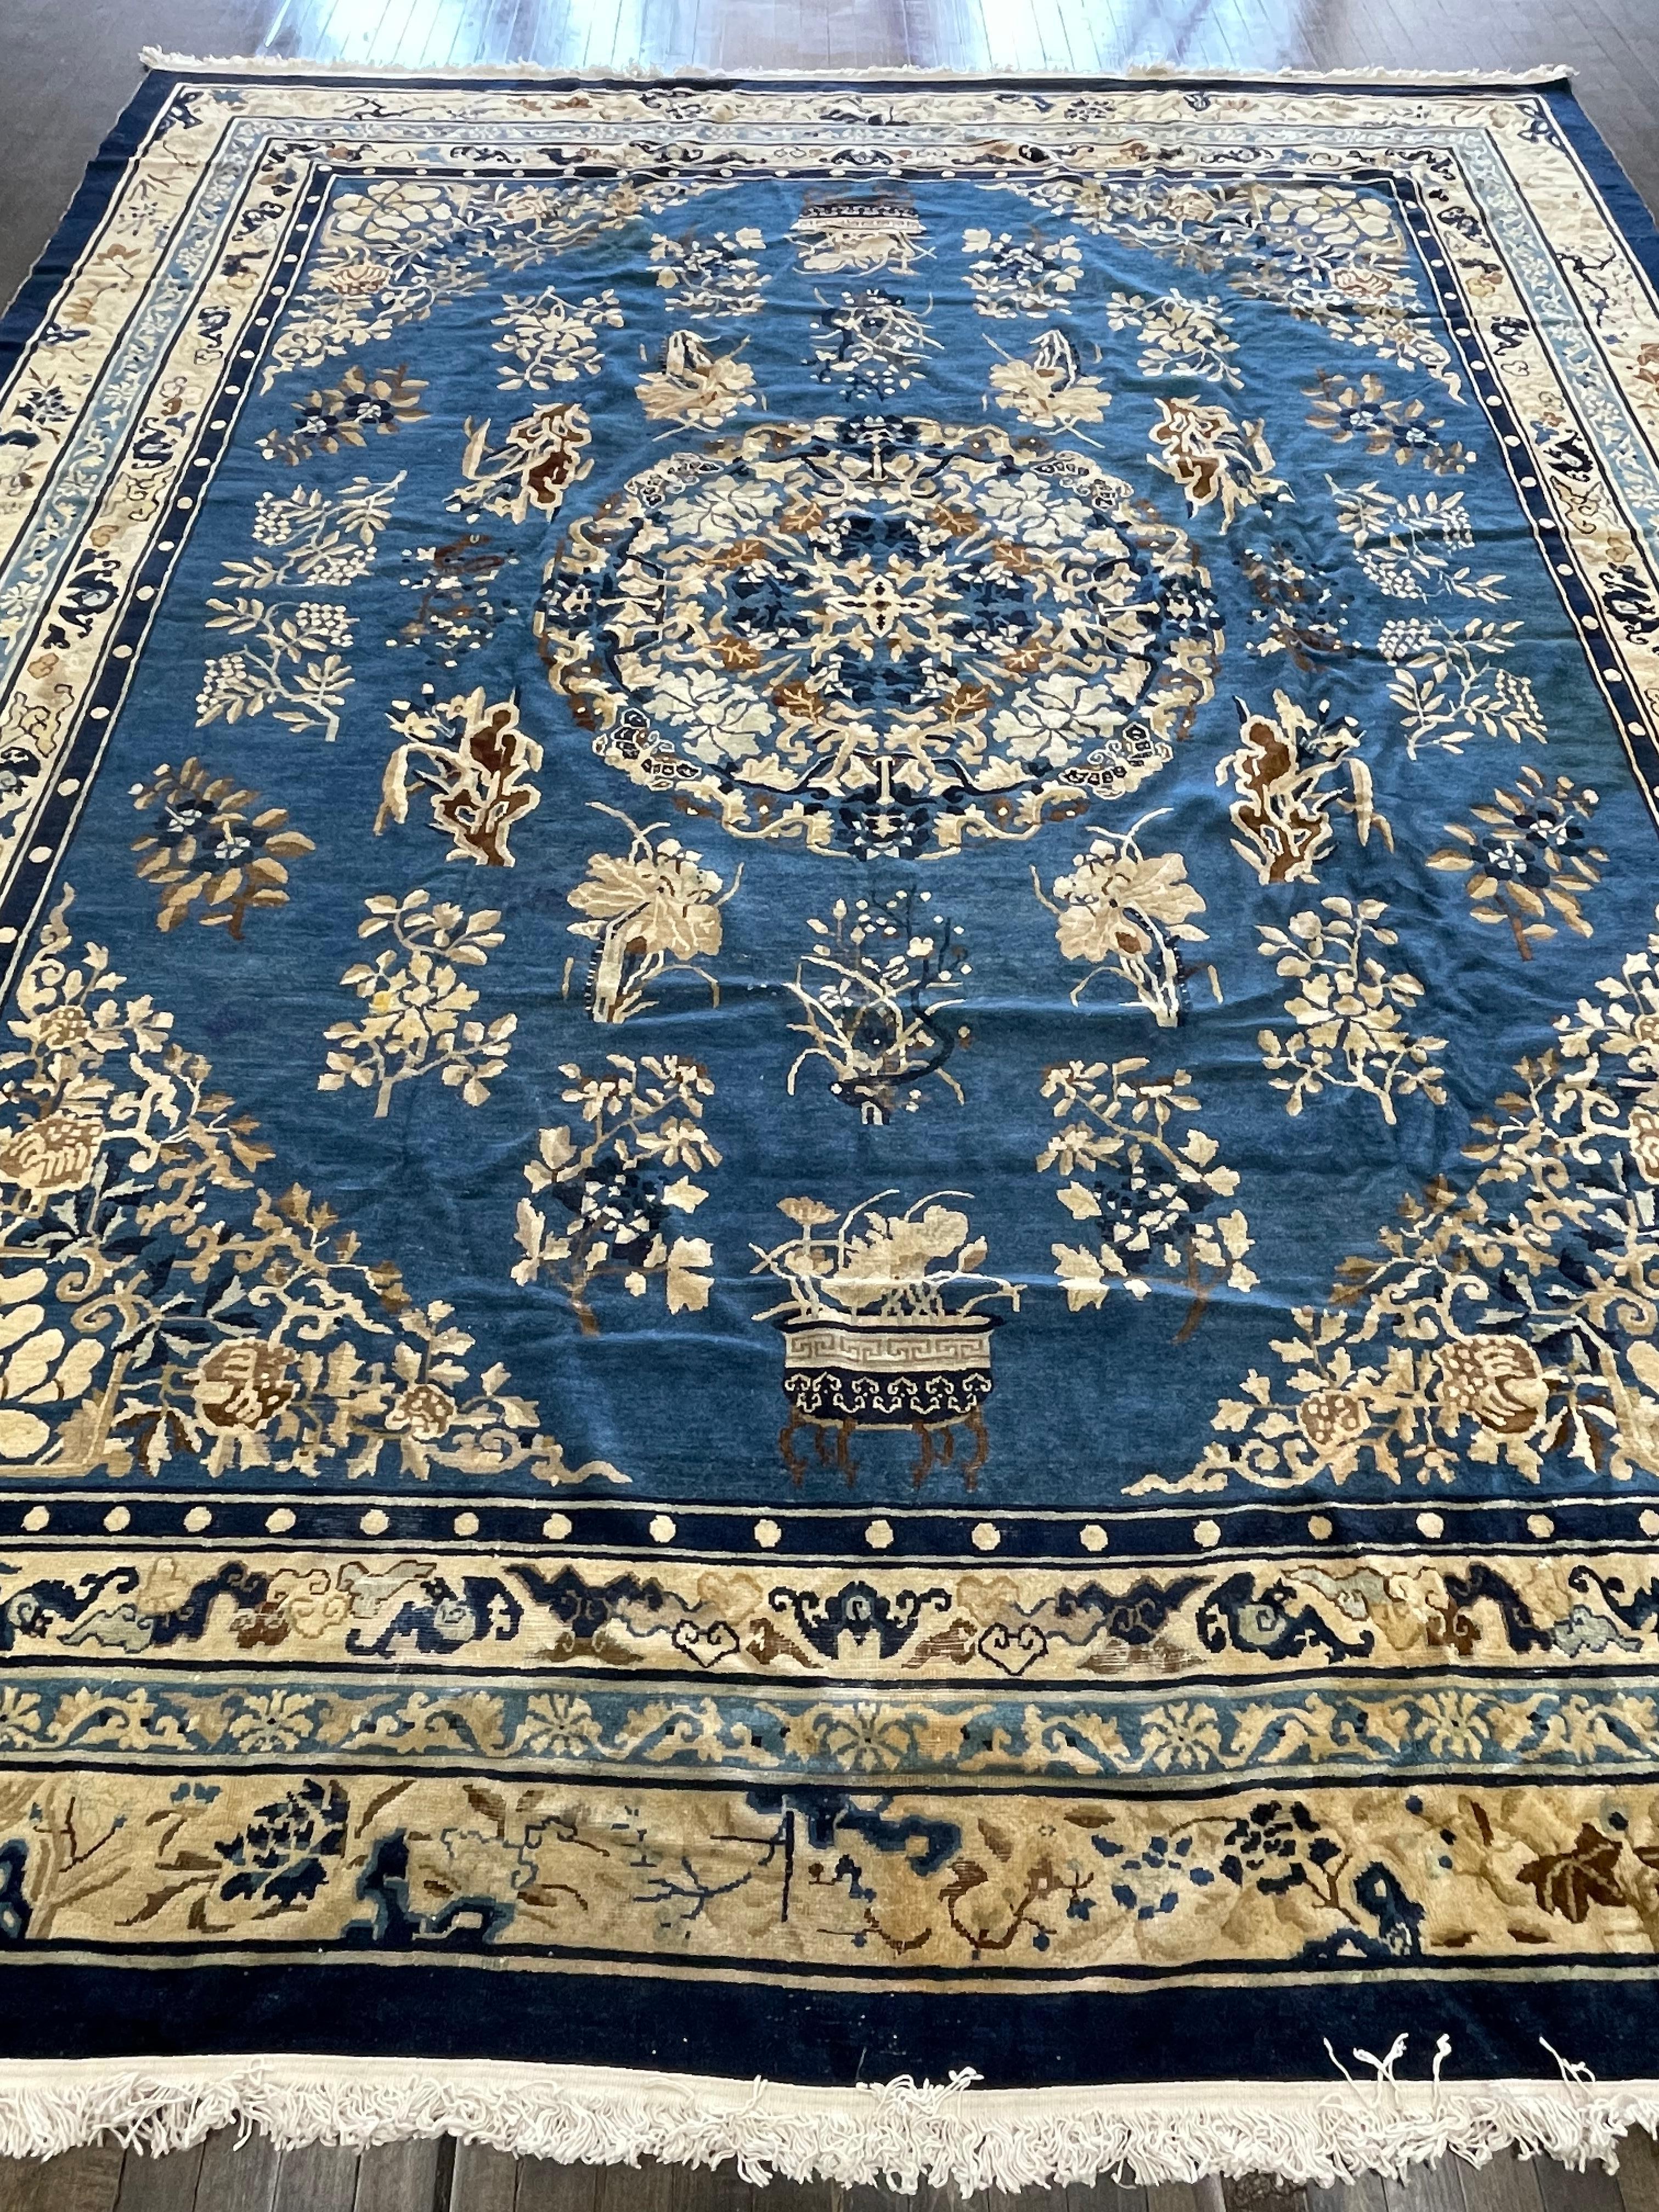 This carpet is hand woven in China. A classical 19th century chinese rug with beautifully decorated field framed with multi borders of fretwork. Structurally this carpet made fairly uniform, with double-wefted cotton foundations on to which the